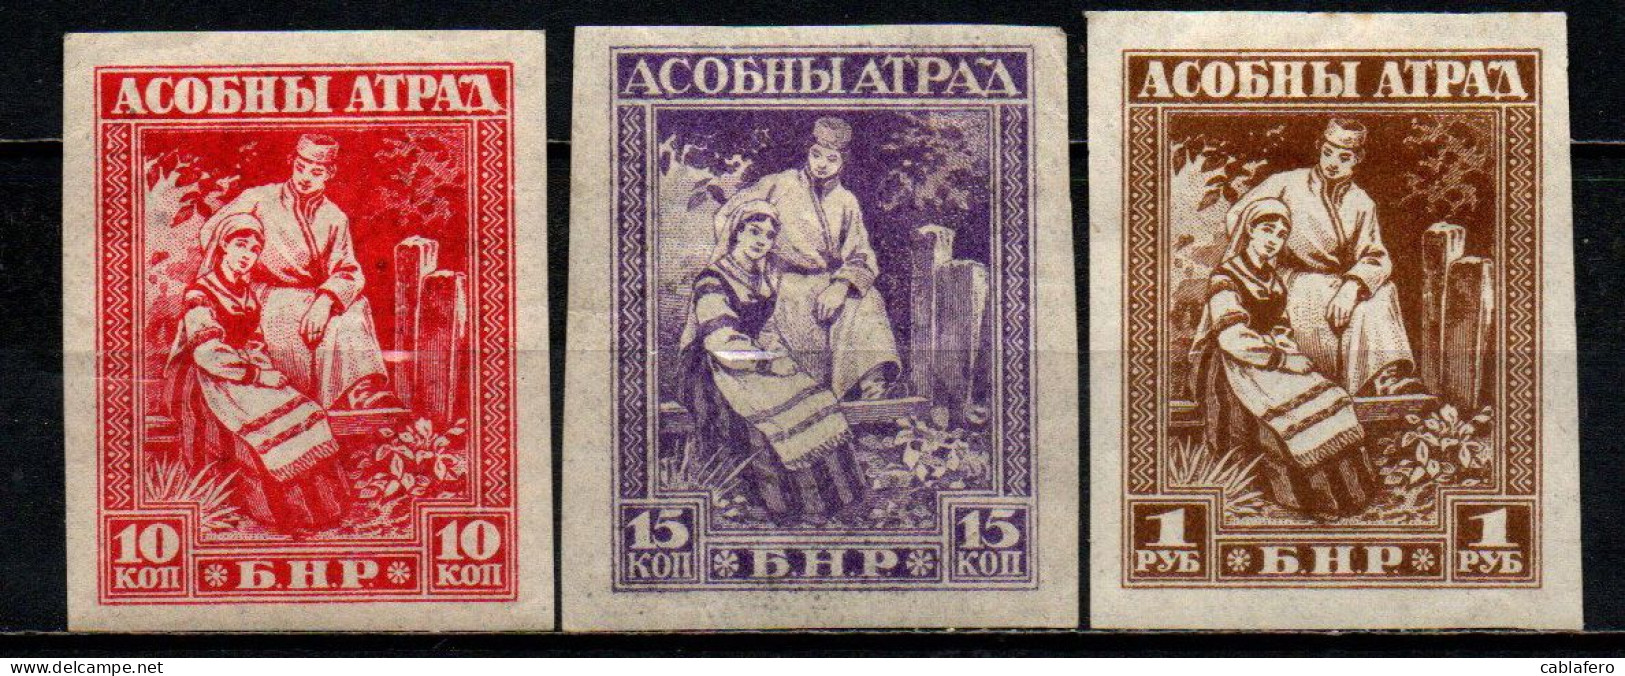 URSS - ARMATA DELL'OVEST - 1922 - COSTUMI REGIONALI - IMPERFORATED - MH - West Army